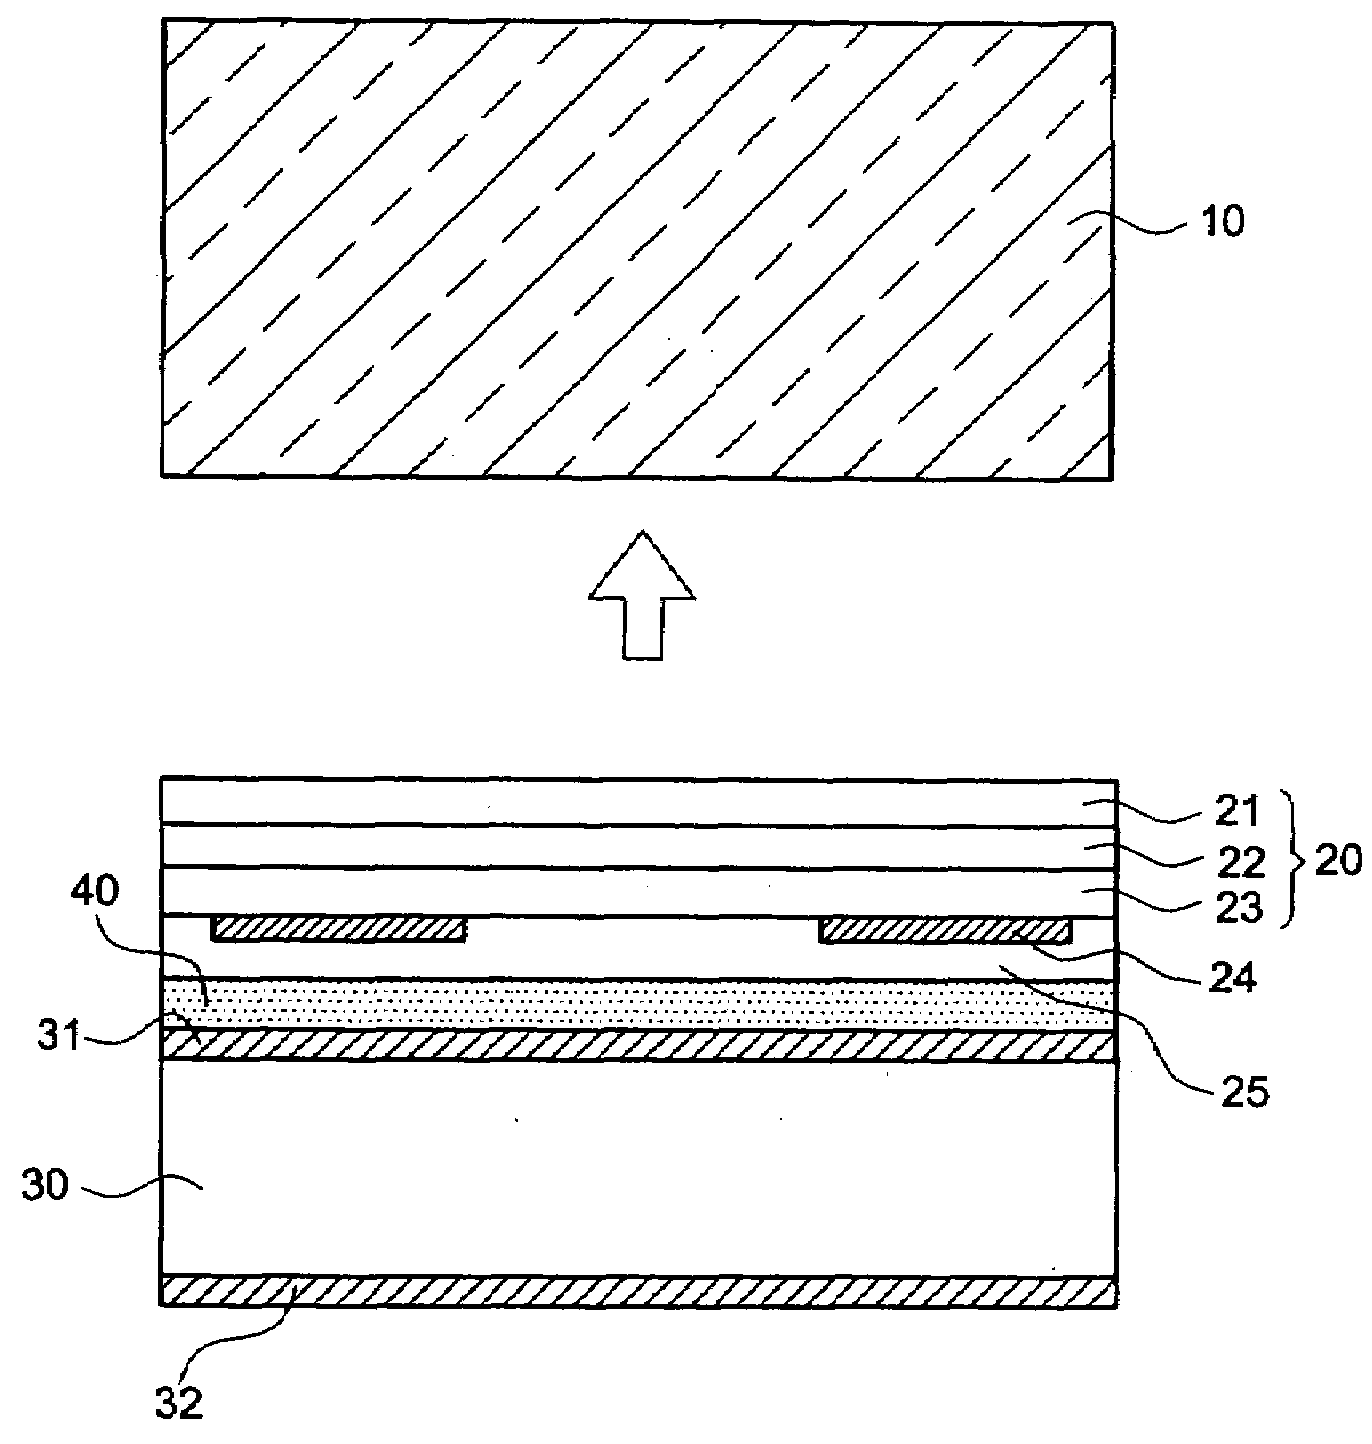 Light emitting diode by use of metal diffusion bonding technology and method of producing light emitting diode